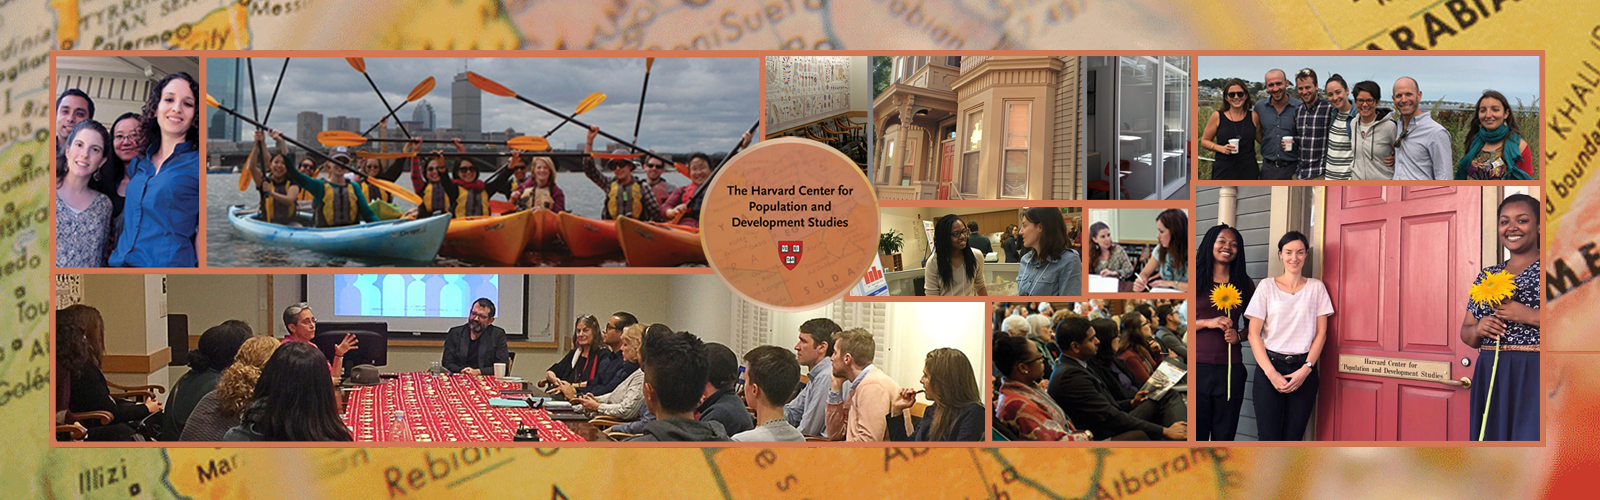 We are proud to support interdisciplinary postdoctoral fellowships at the Harvard Pop Center!